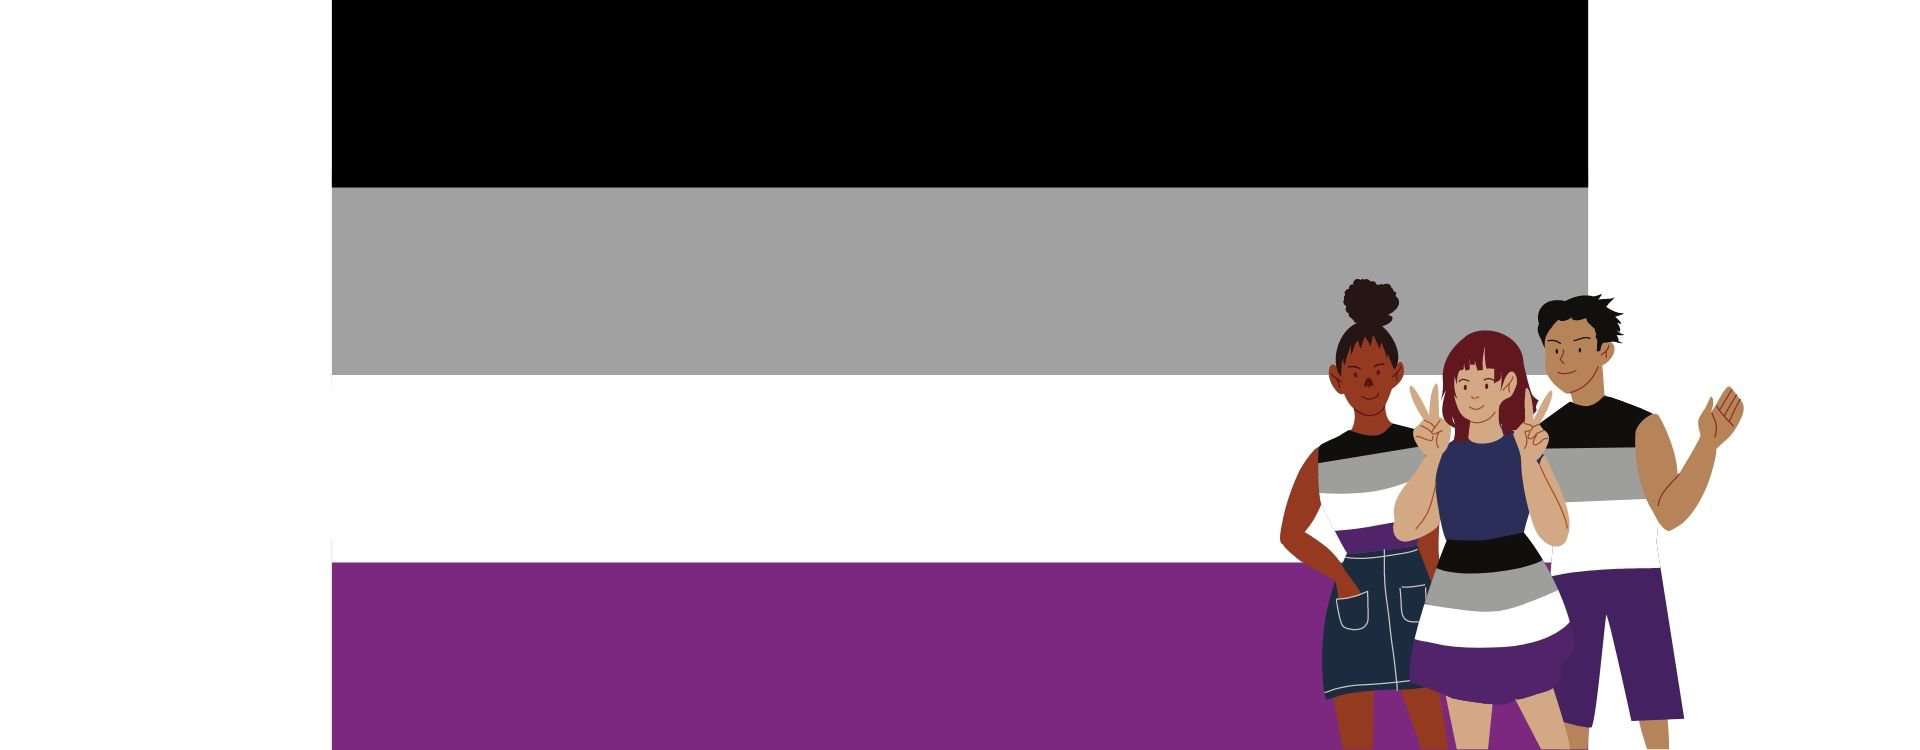 asexual - LGBT flag